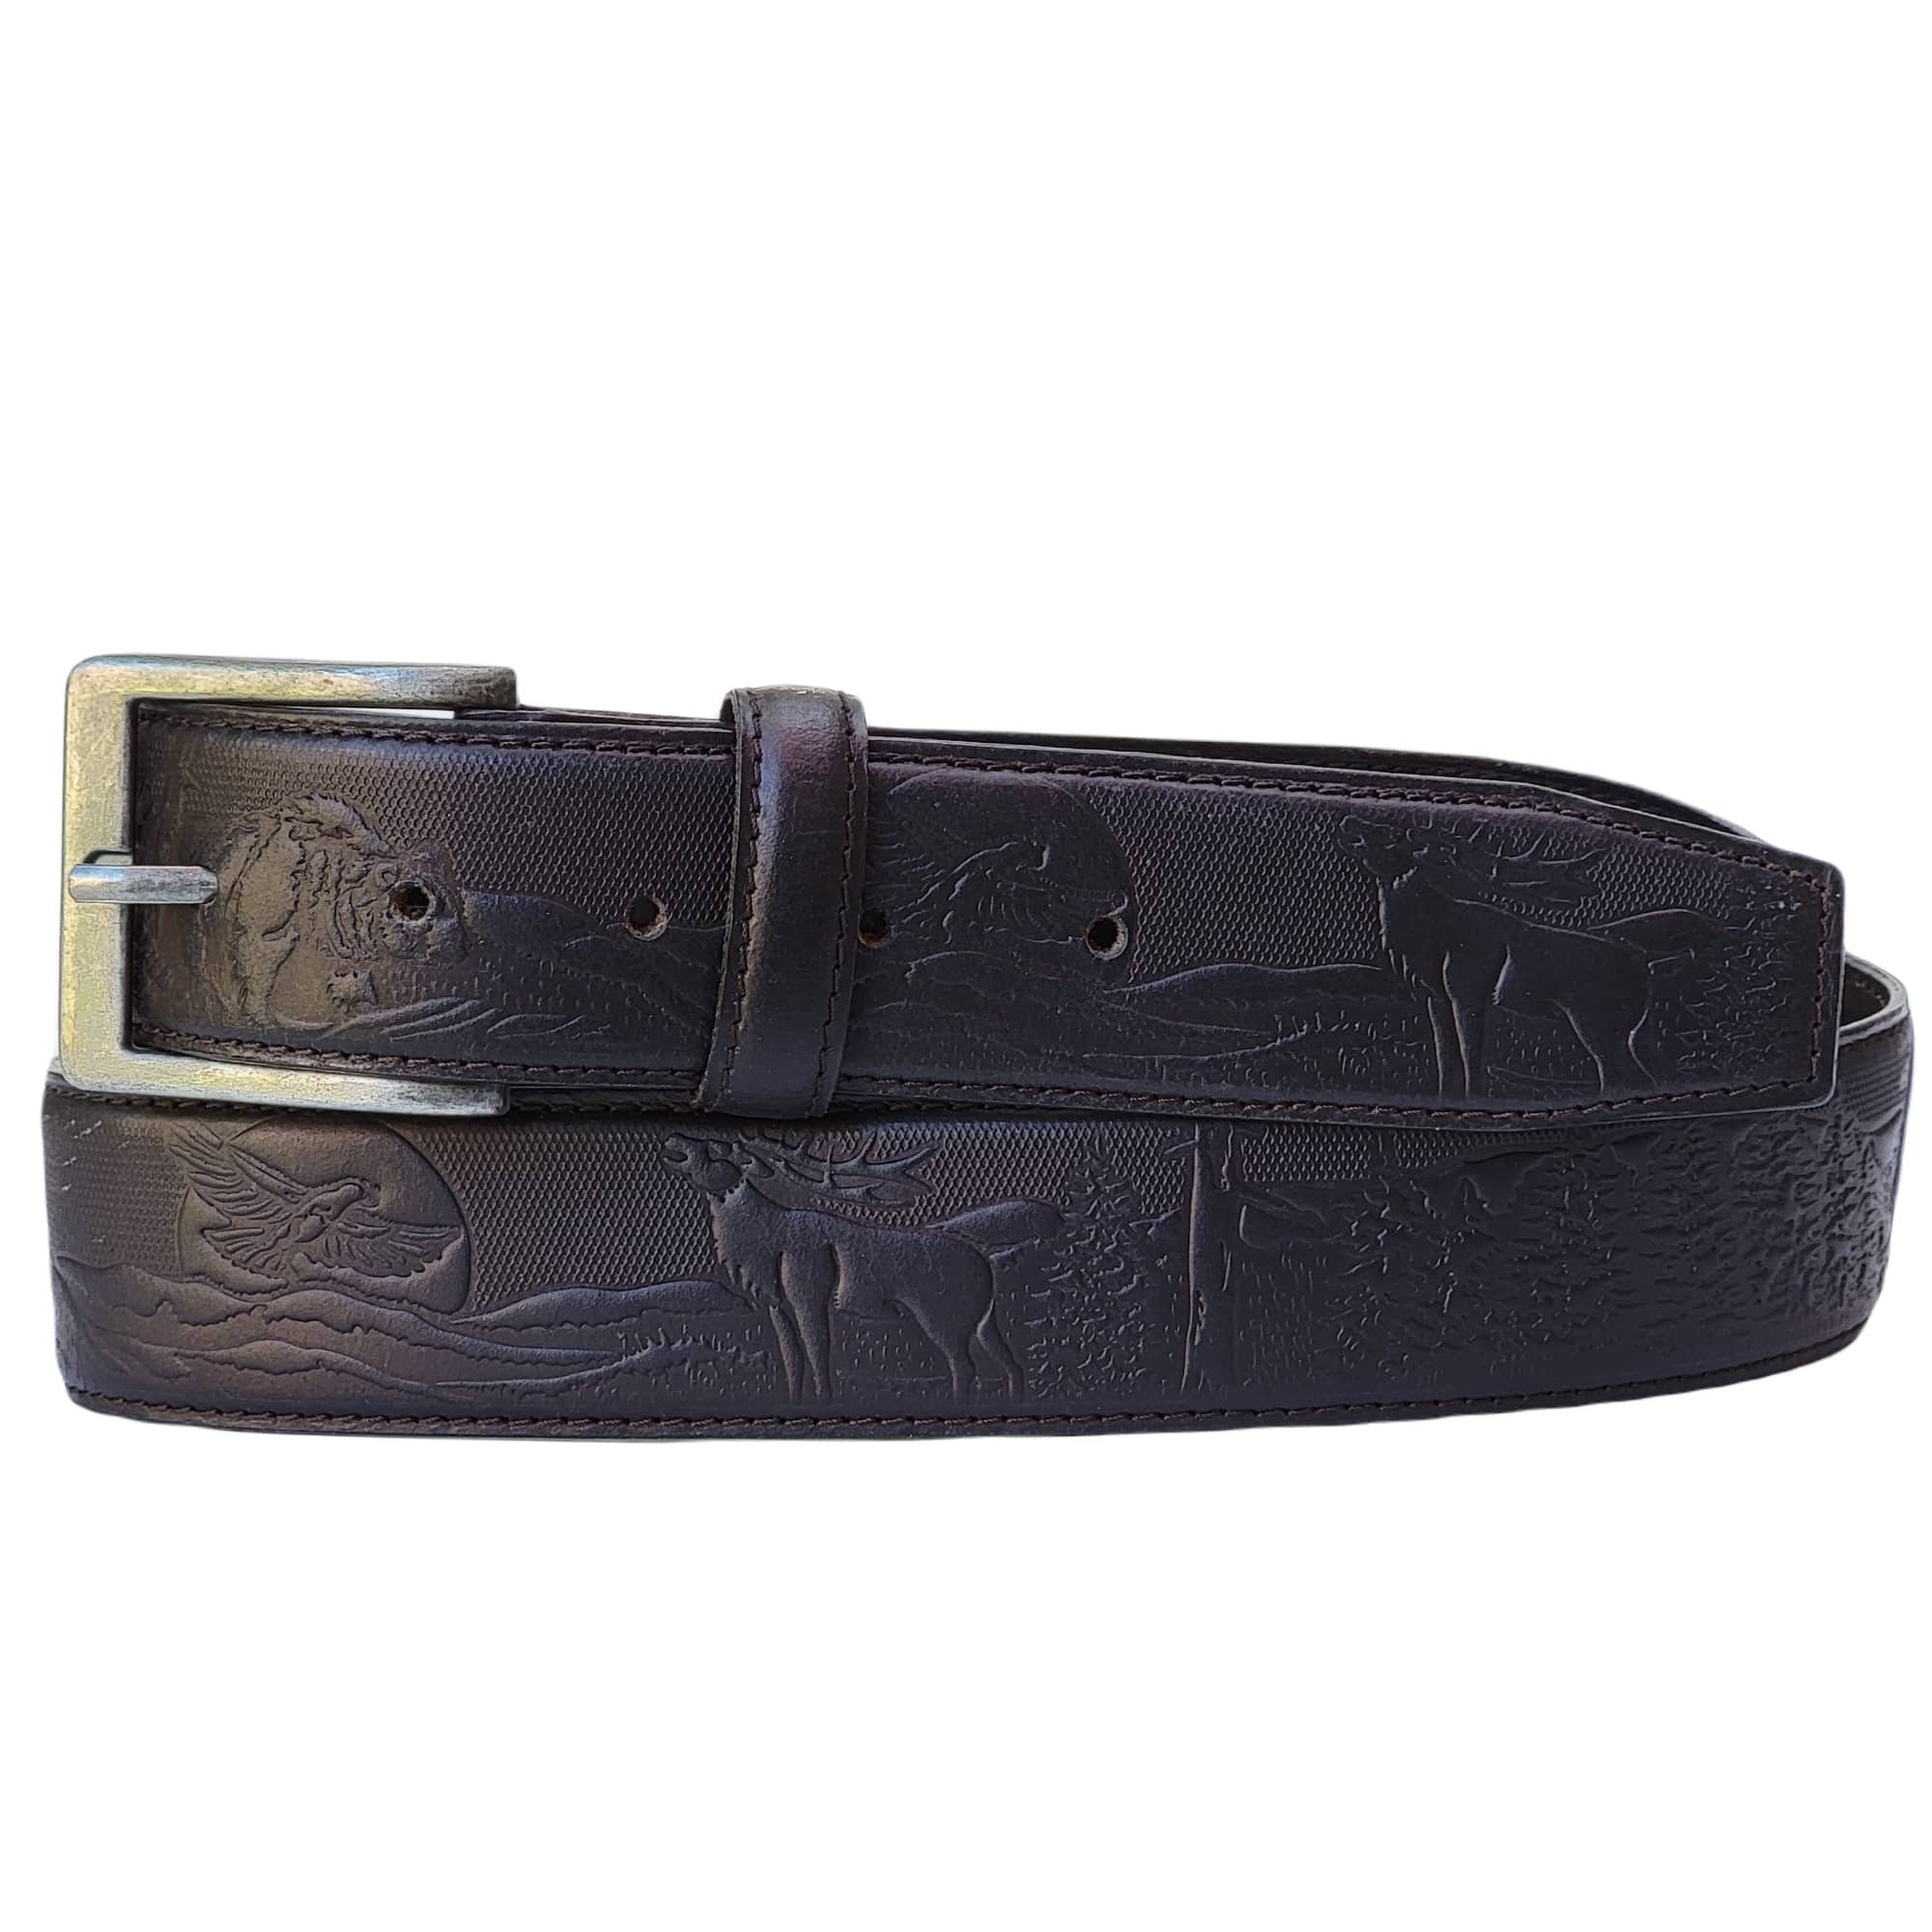 Wildlife Him, Gift Made - Embossed HANDCRAFTED for Belt, Dad Grain Leather for Gift Belt Embossed, Canada, in Full Leather 100% Embossed Etsy